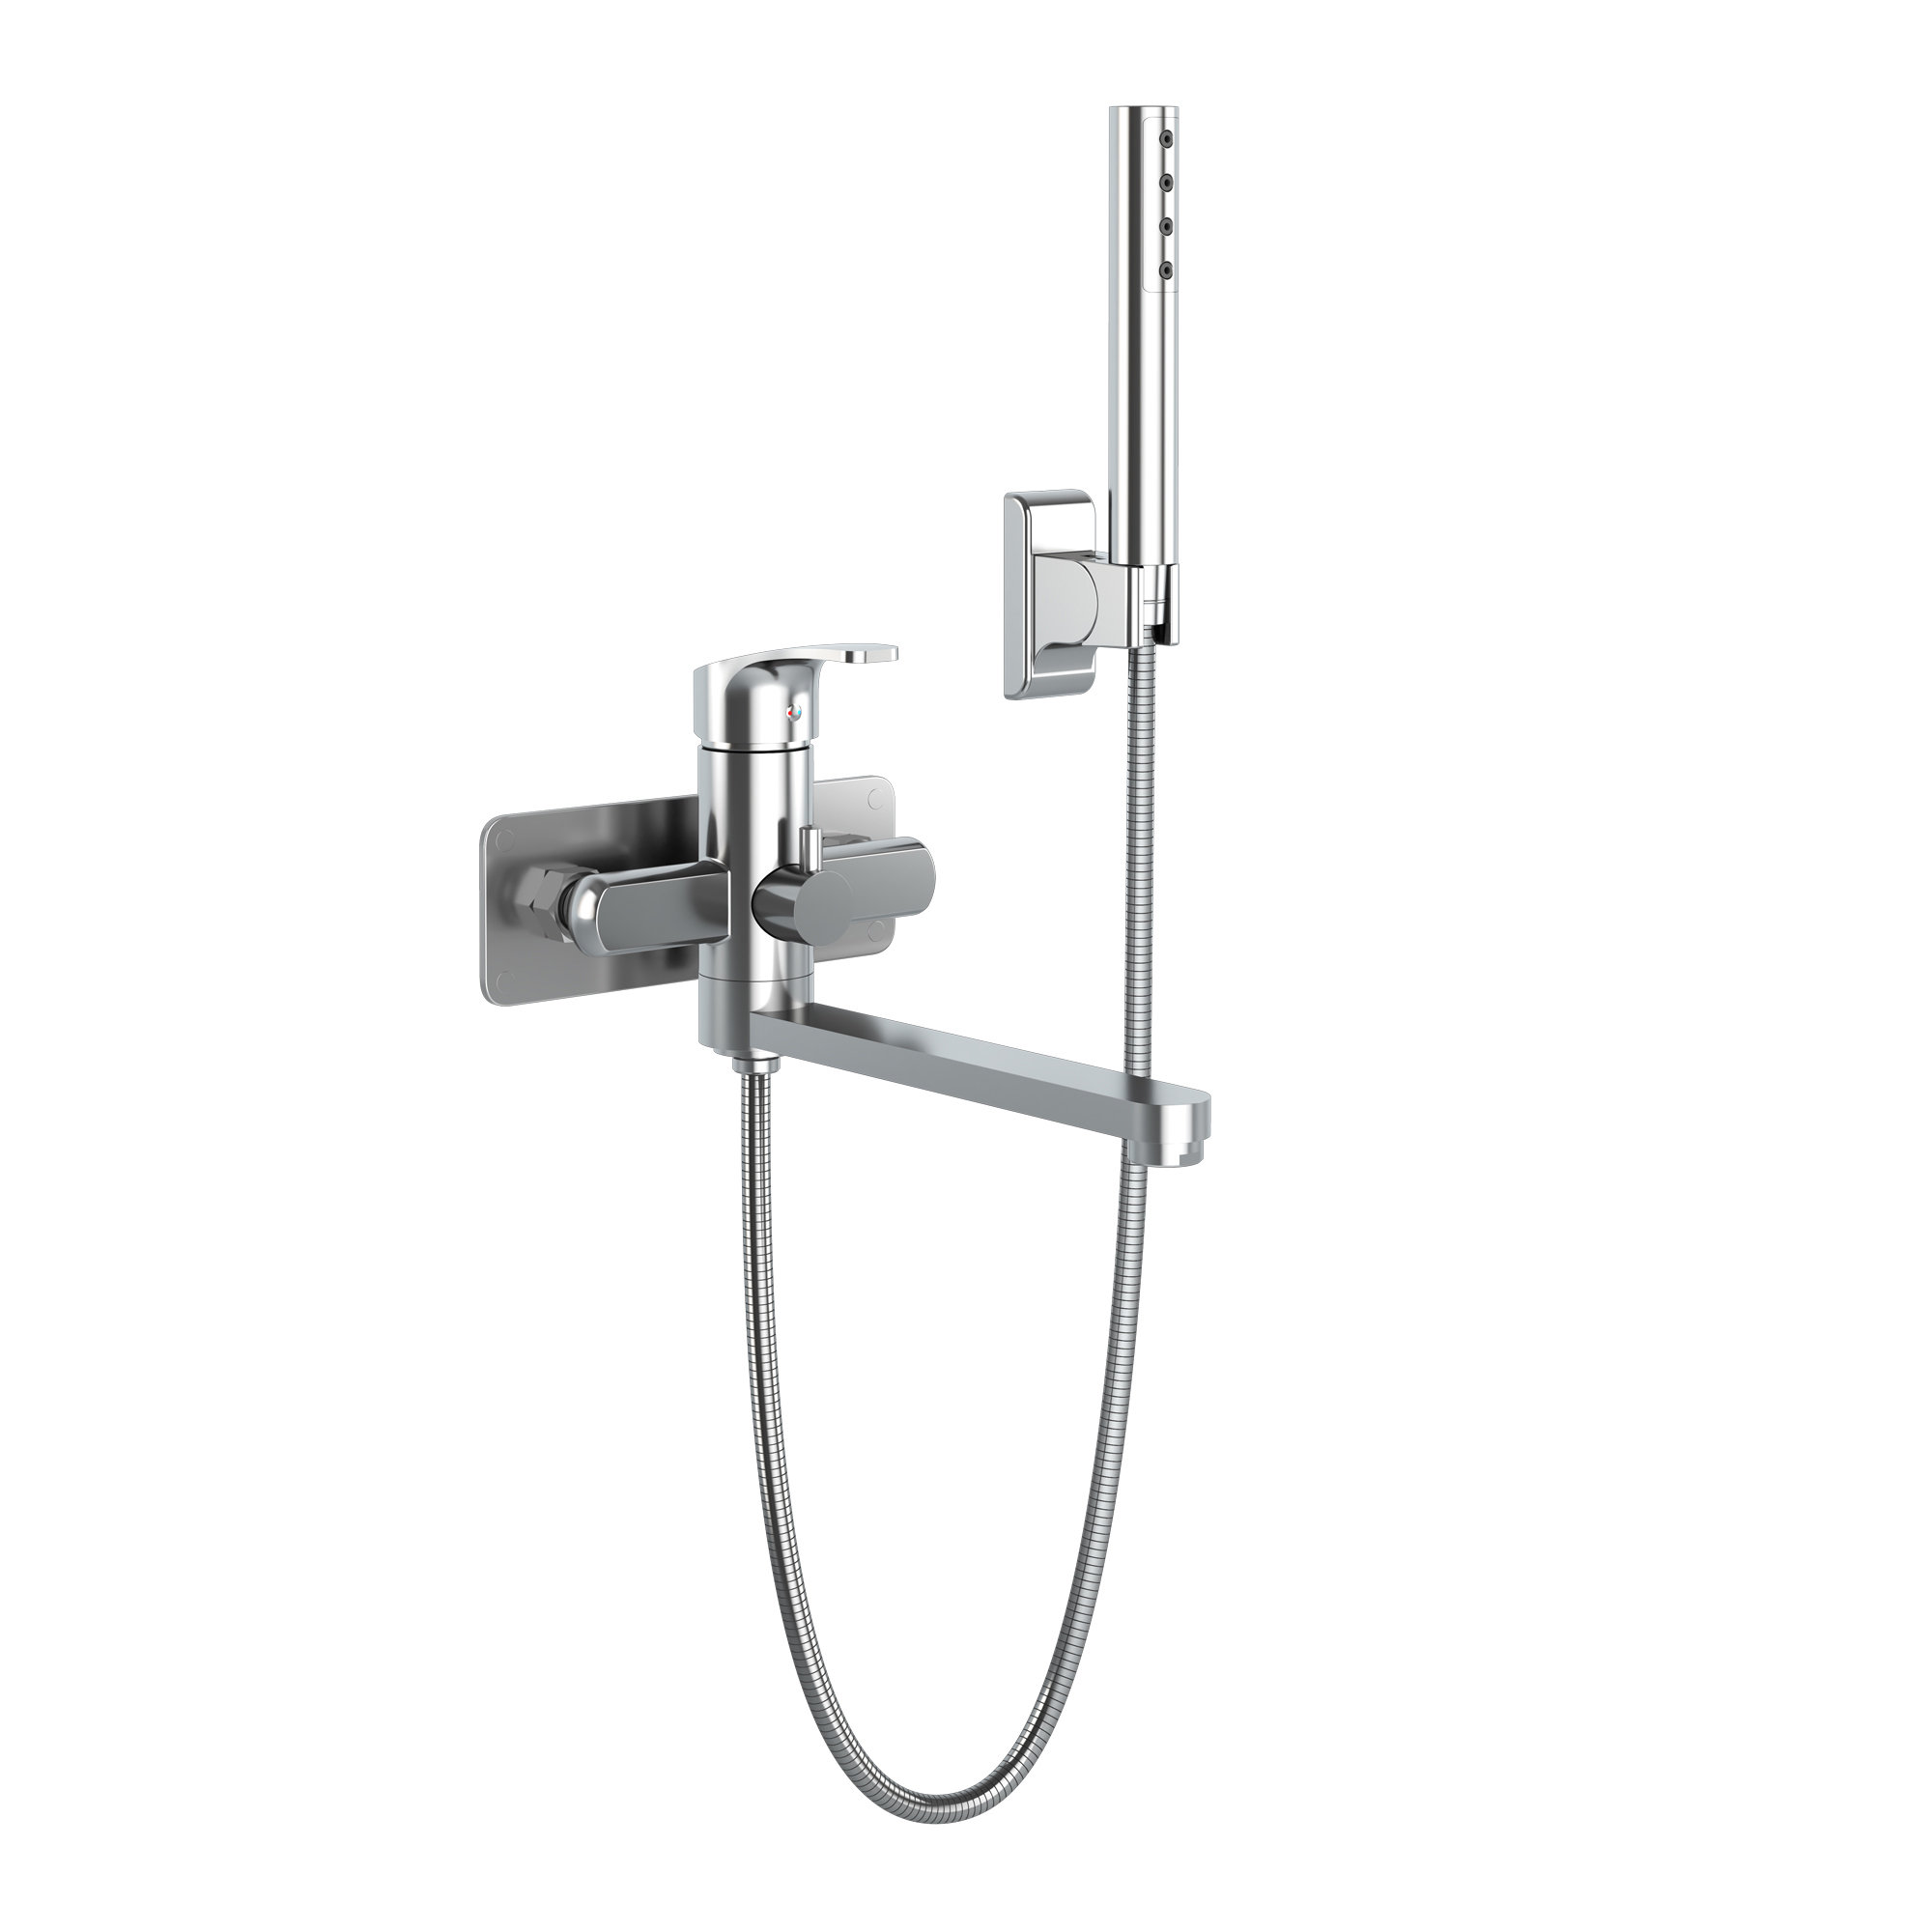 Wall Mounted Shower Faucet, Single Function and Rough-in Valve Includ -  Sumerain Faucet Direct Sales